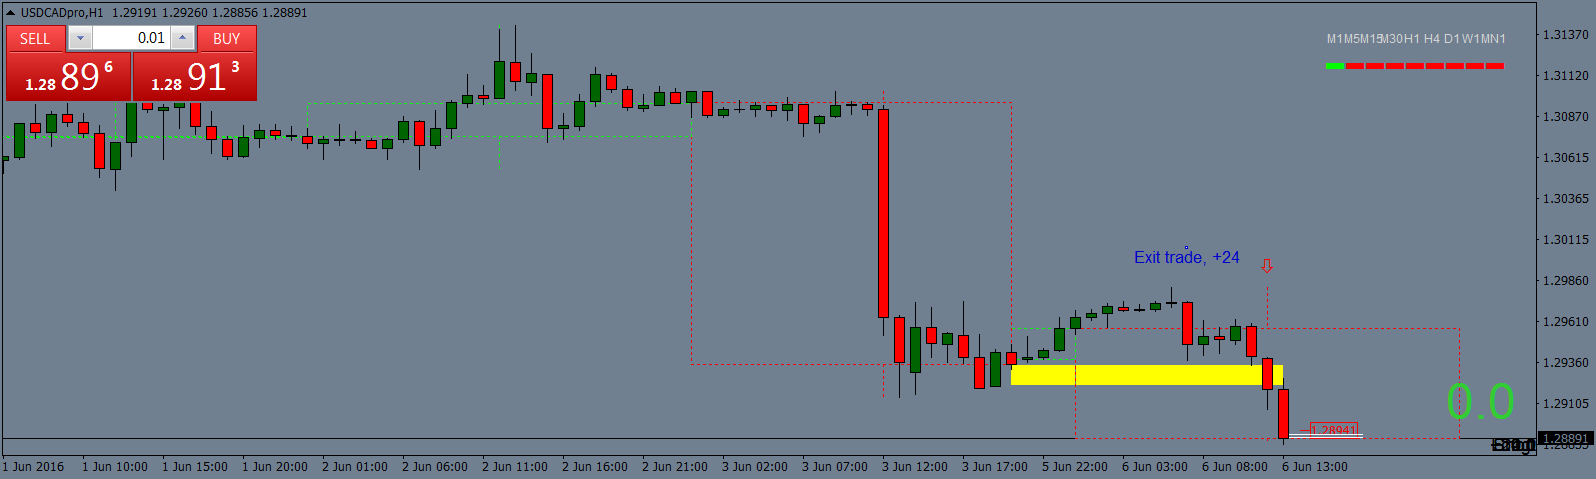 USDCADproH1pst.png